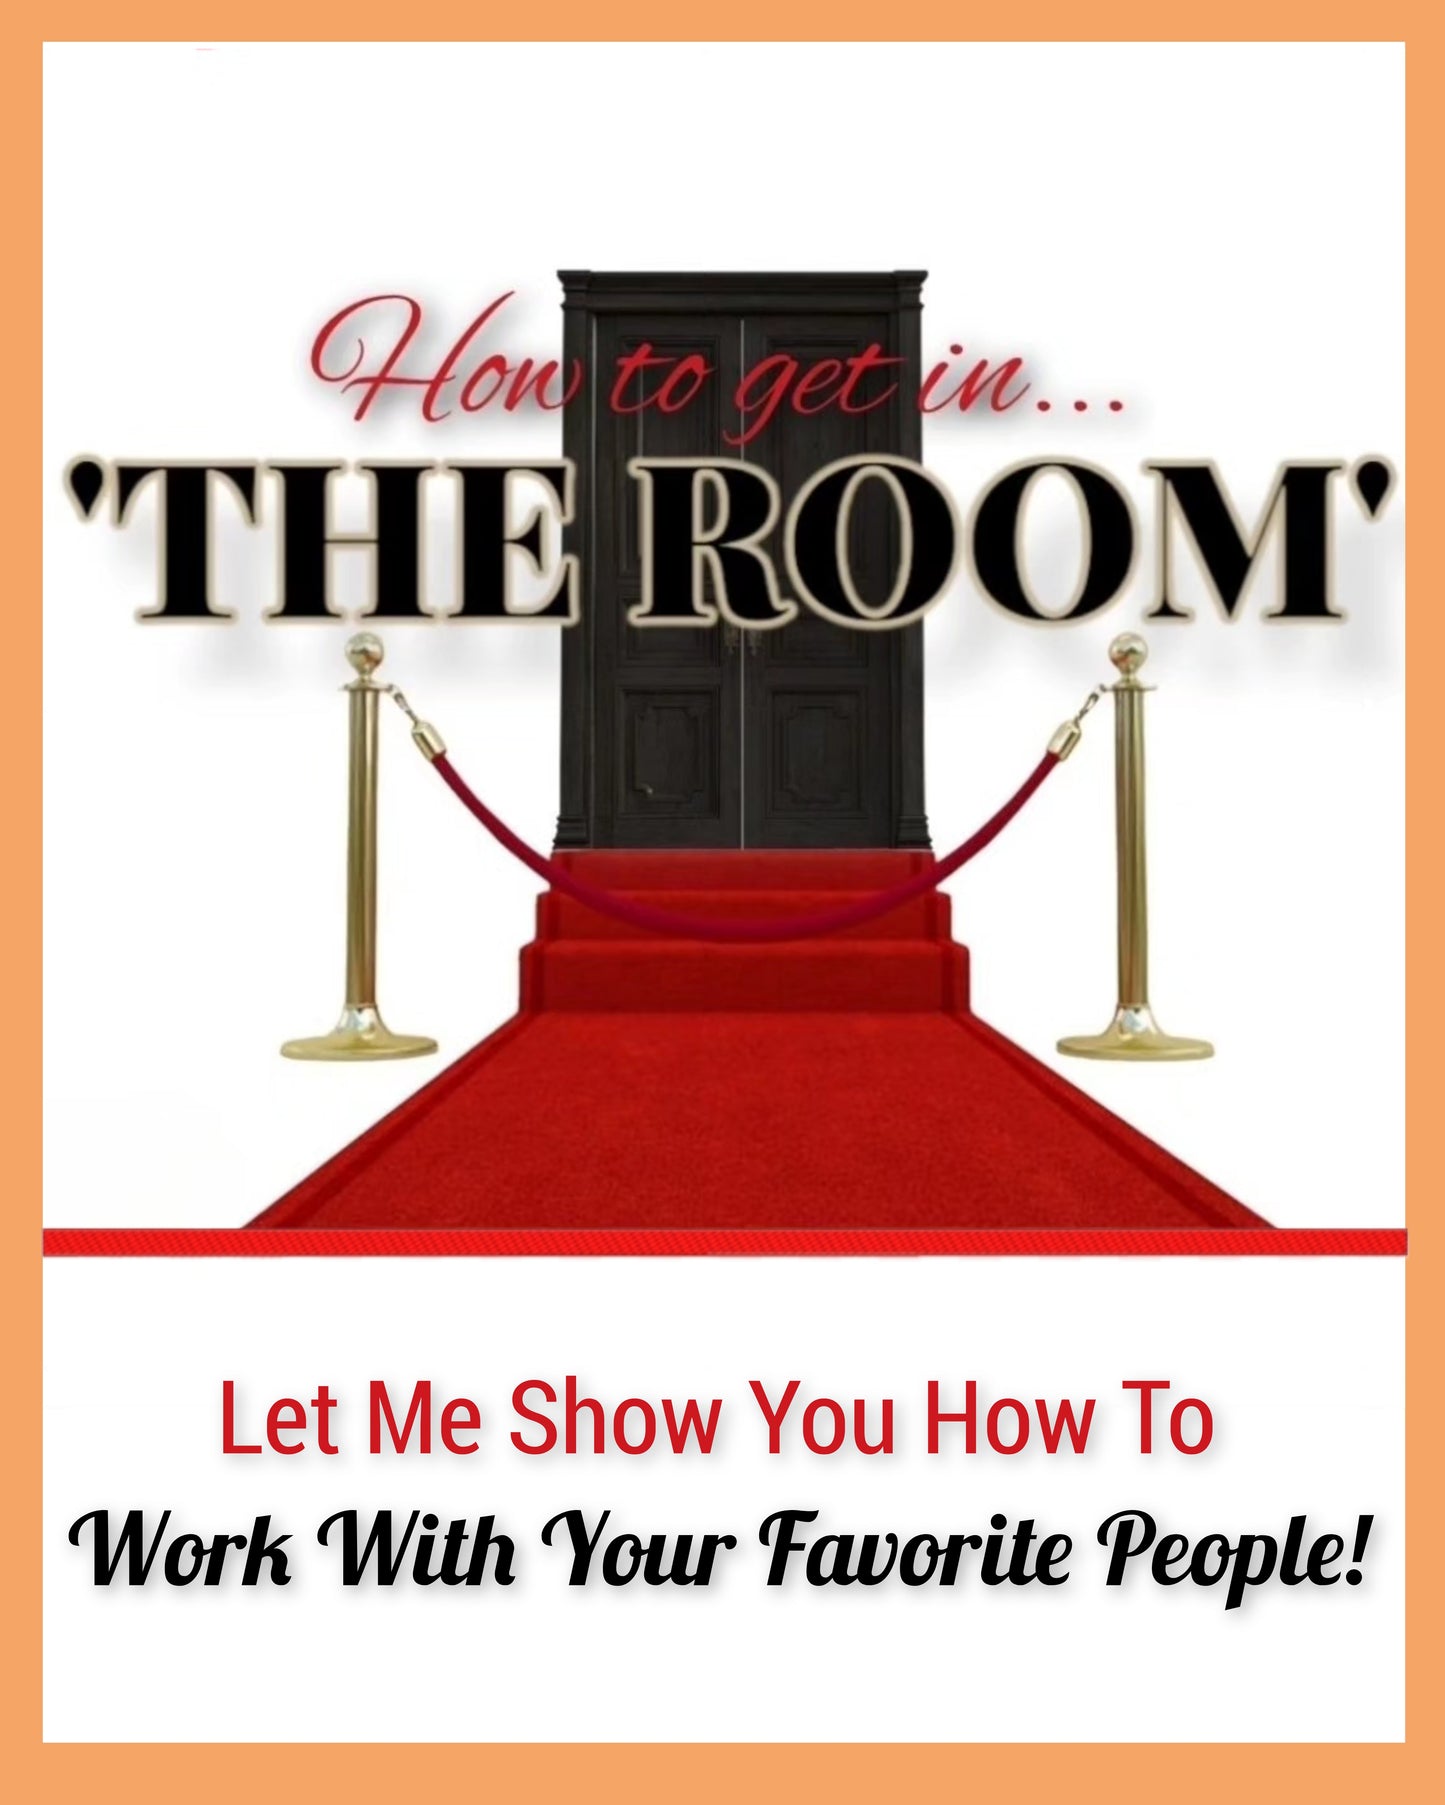 How To Get In 'THE ROOM'